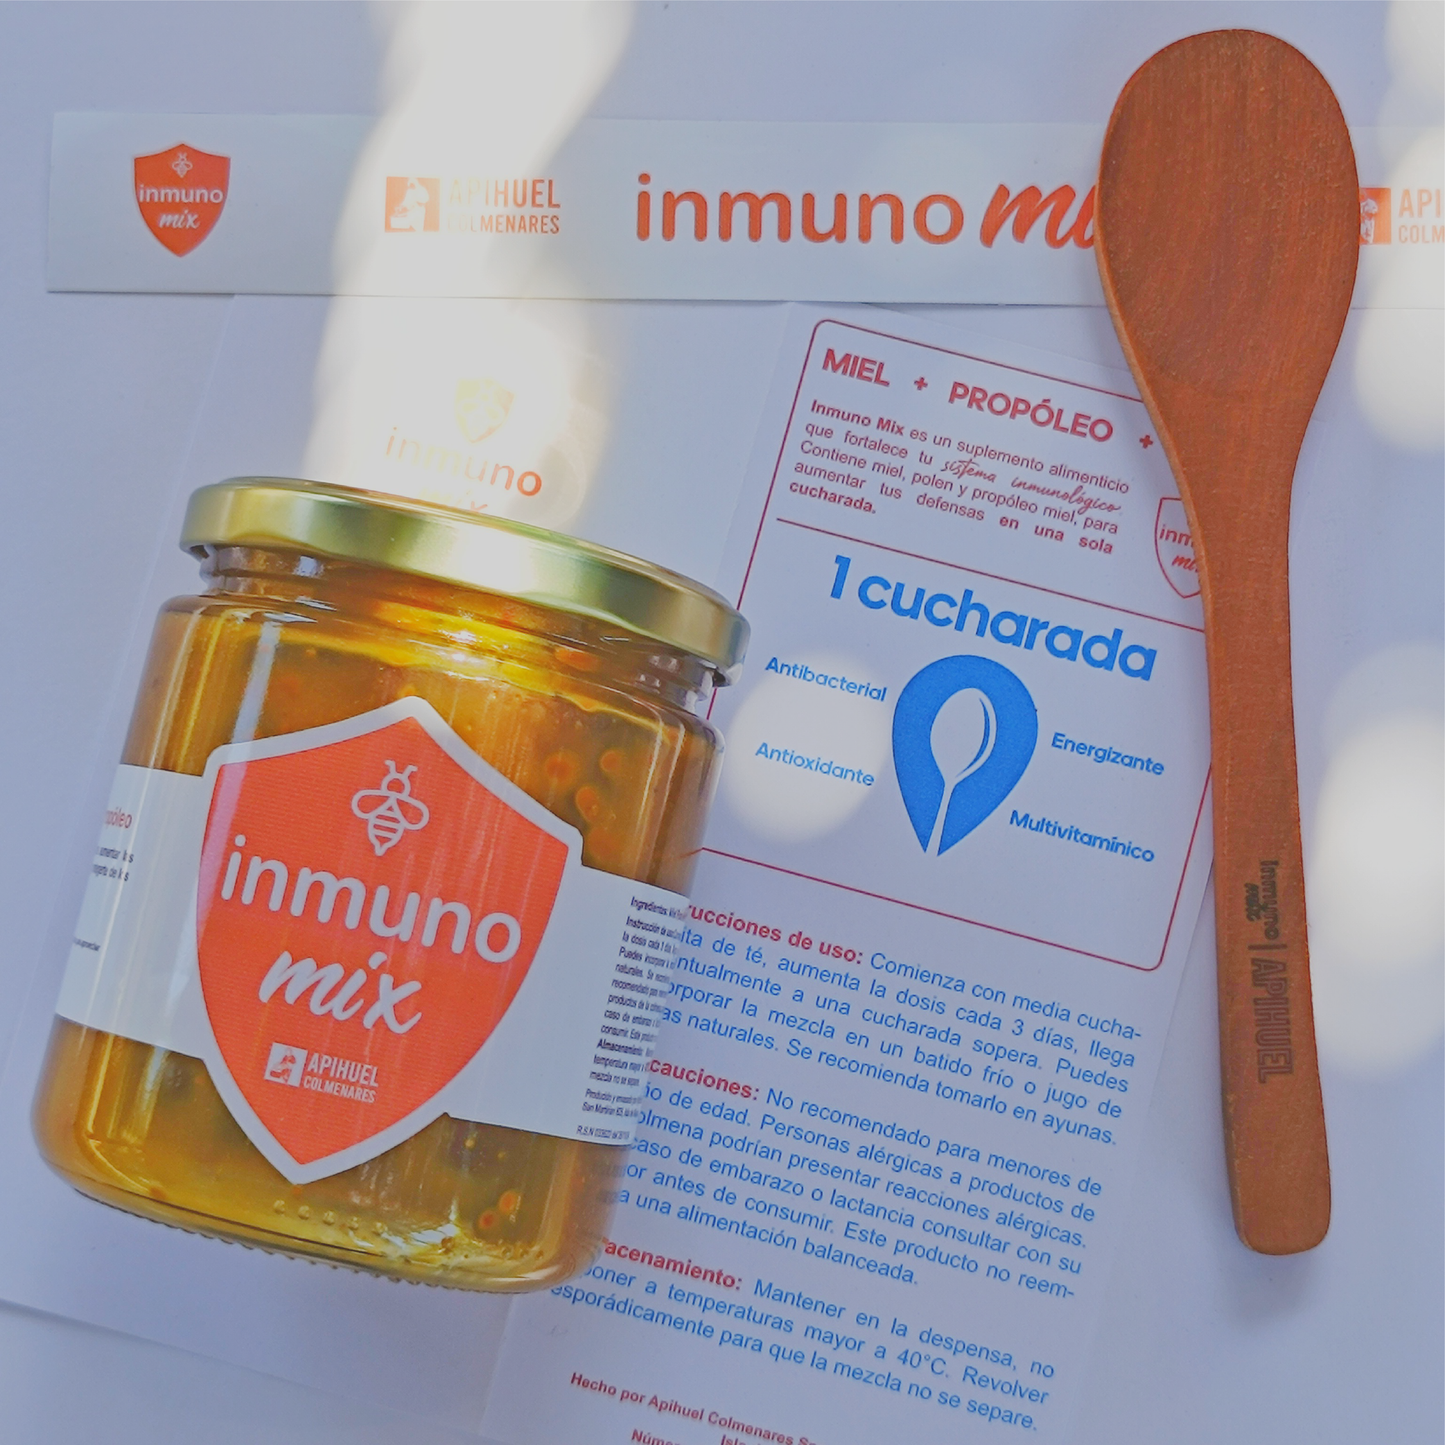 A jar of Inmuno Mix with a spoon, label, and logo, showcasing a blend of honey, energizing pollen, and propolis for immune support.